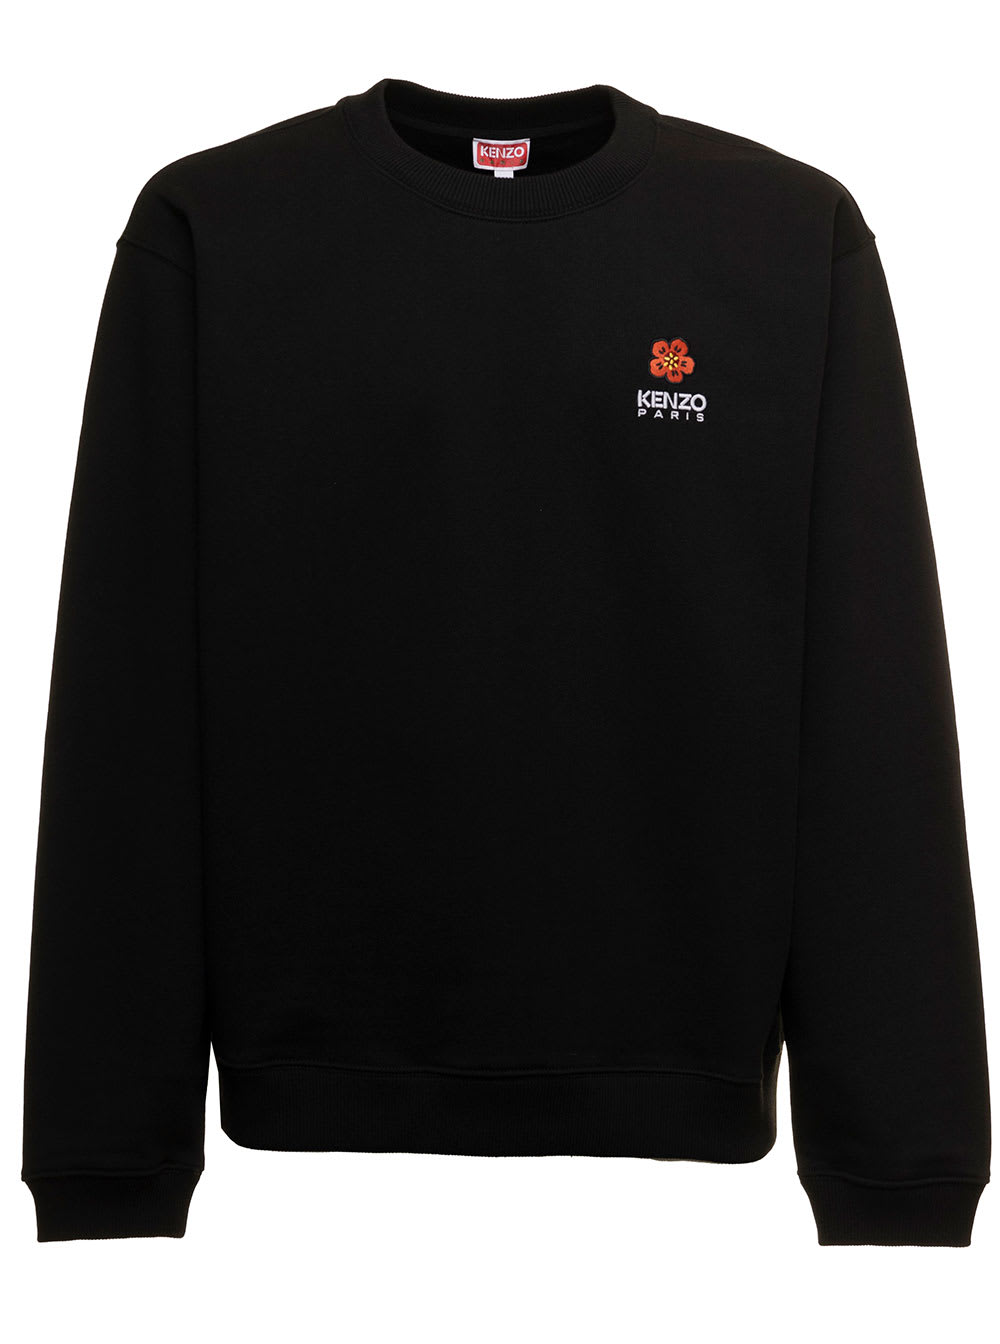 Black Sweatshirt In Light Fllece With Broke Flower Embroidery To The Chest Kenzo Man